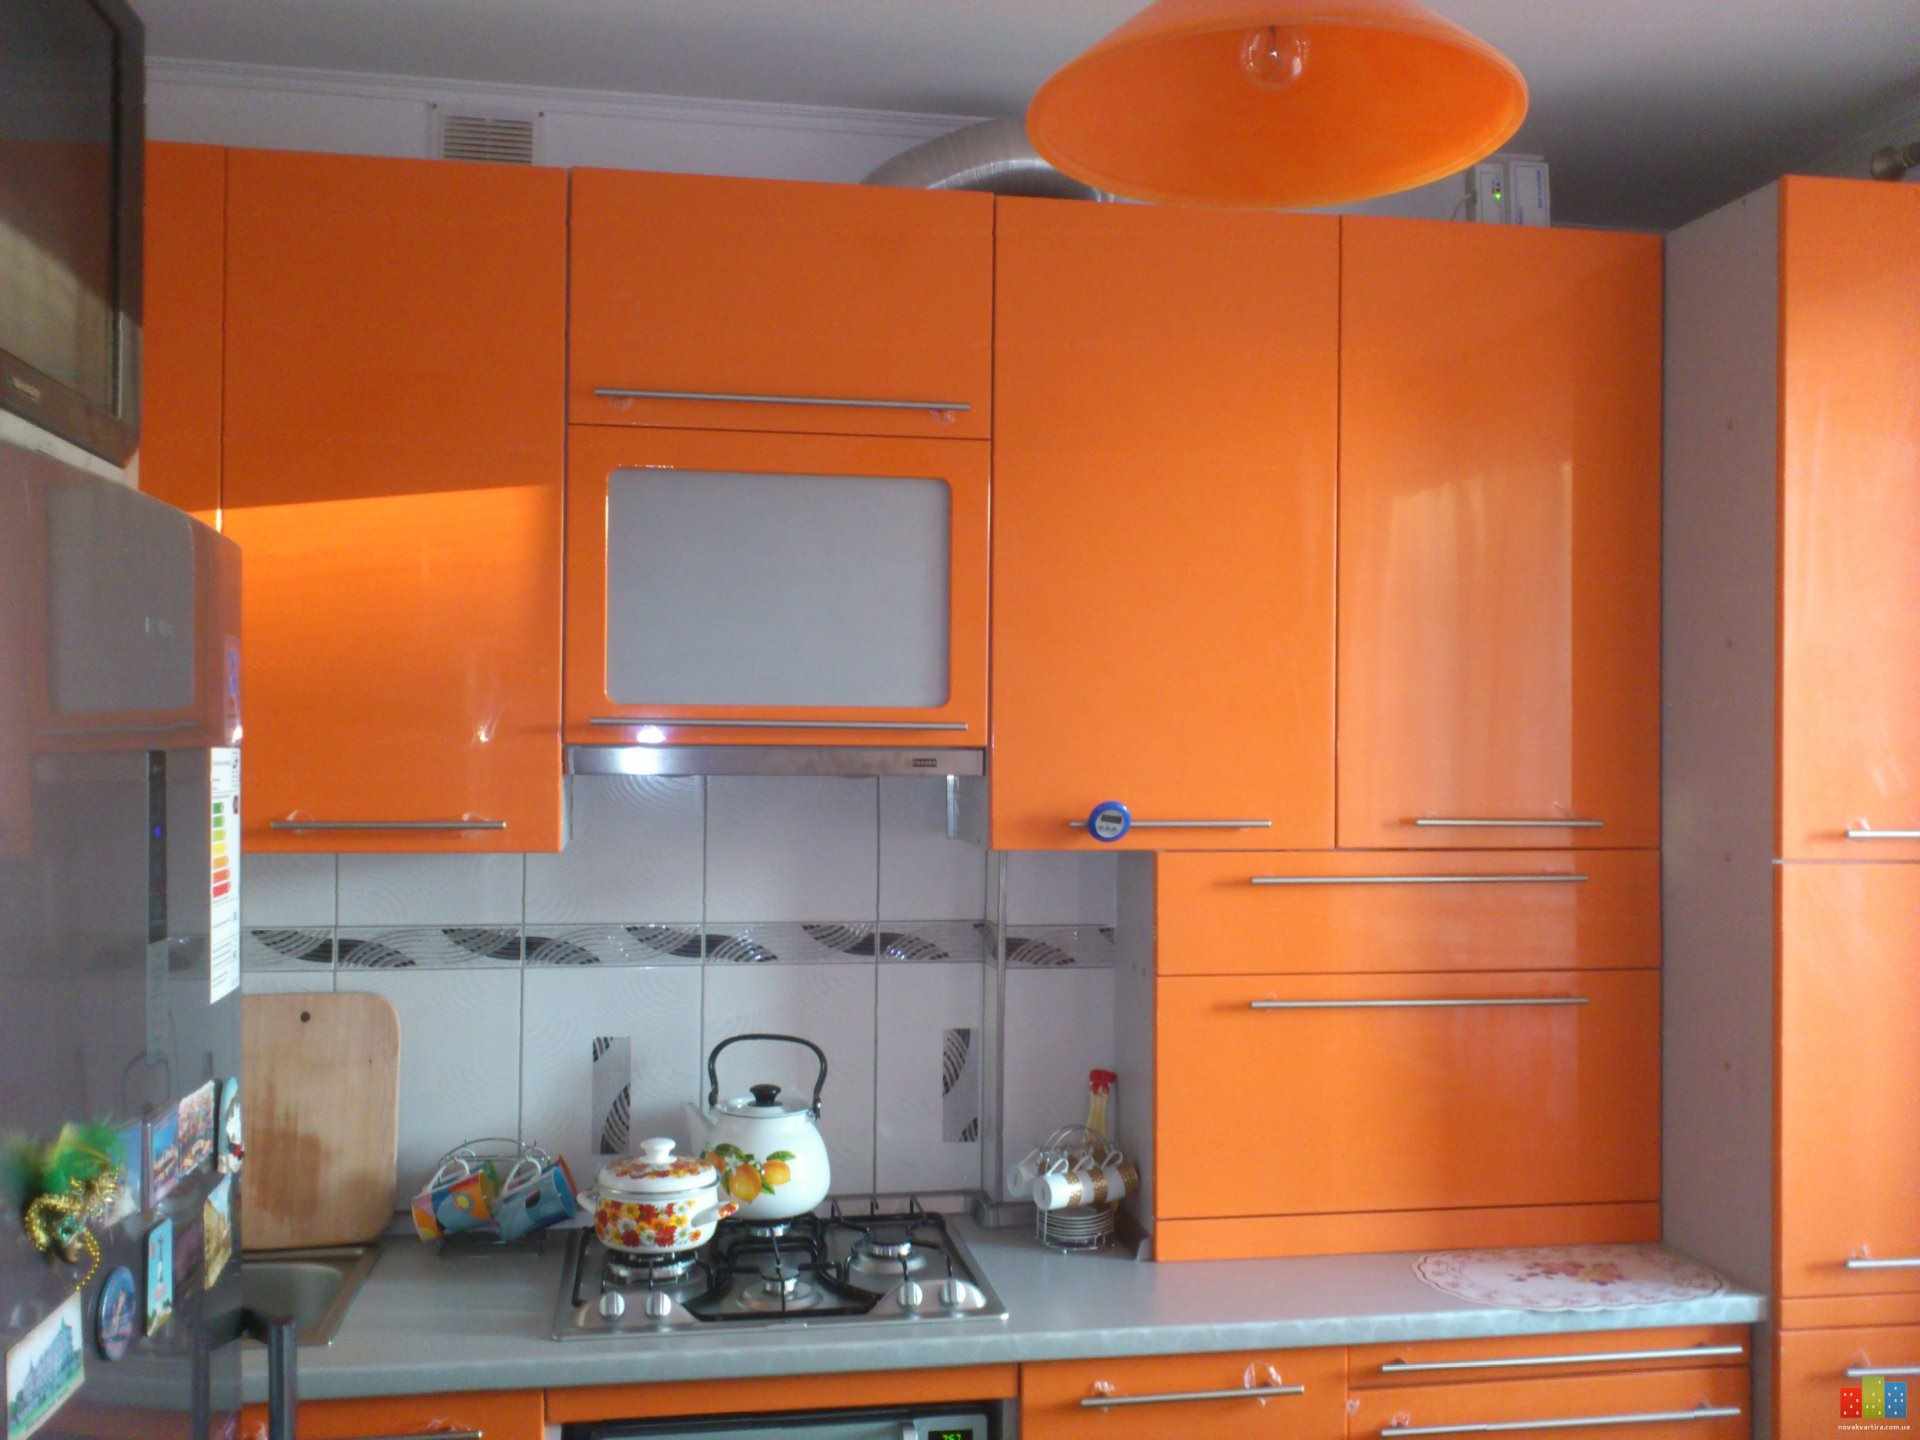 variant of a bright kitchen decor with a gas boiler